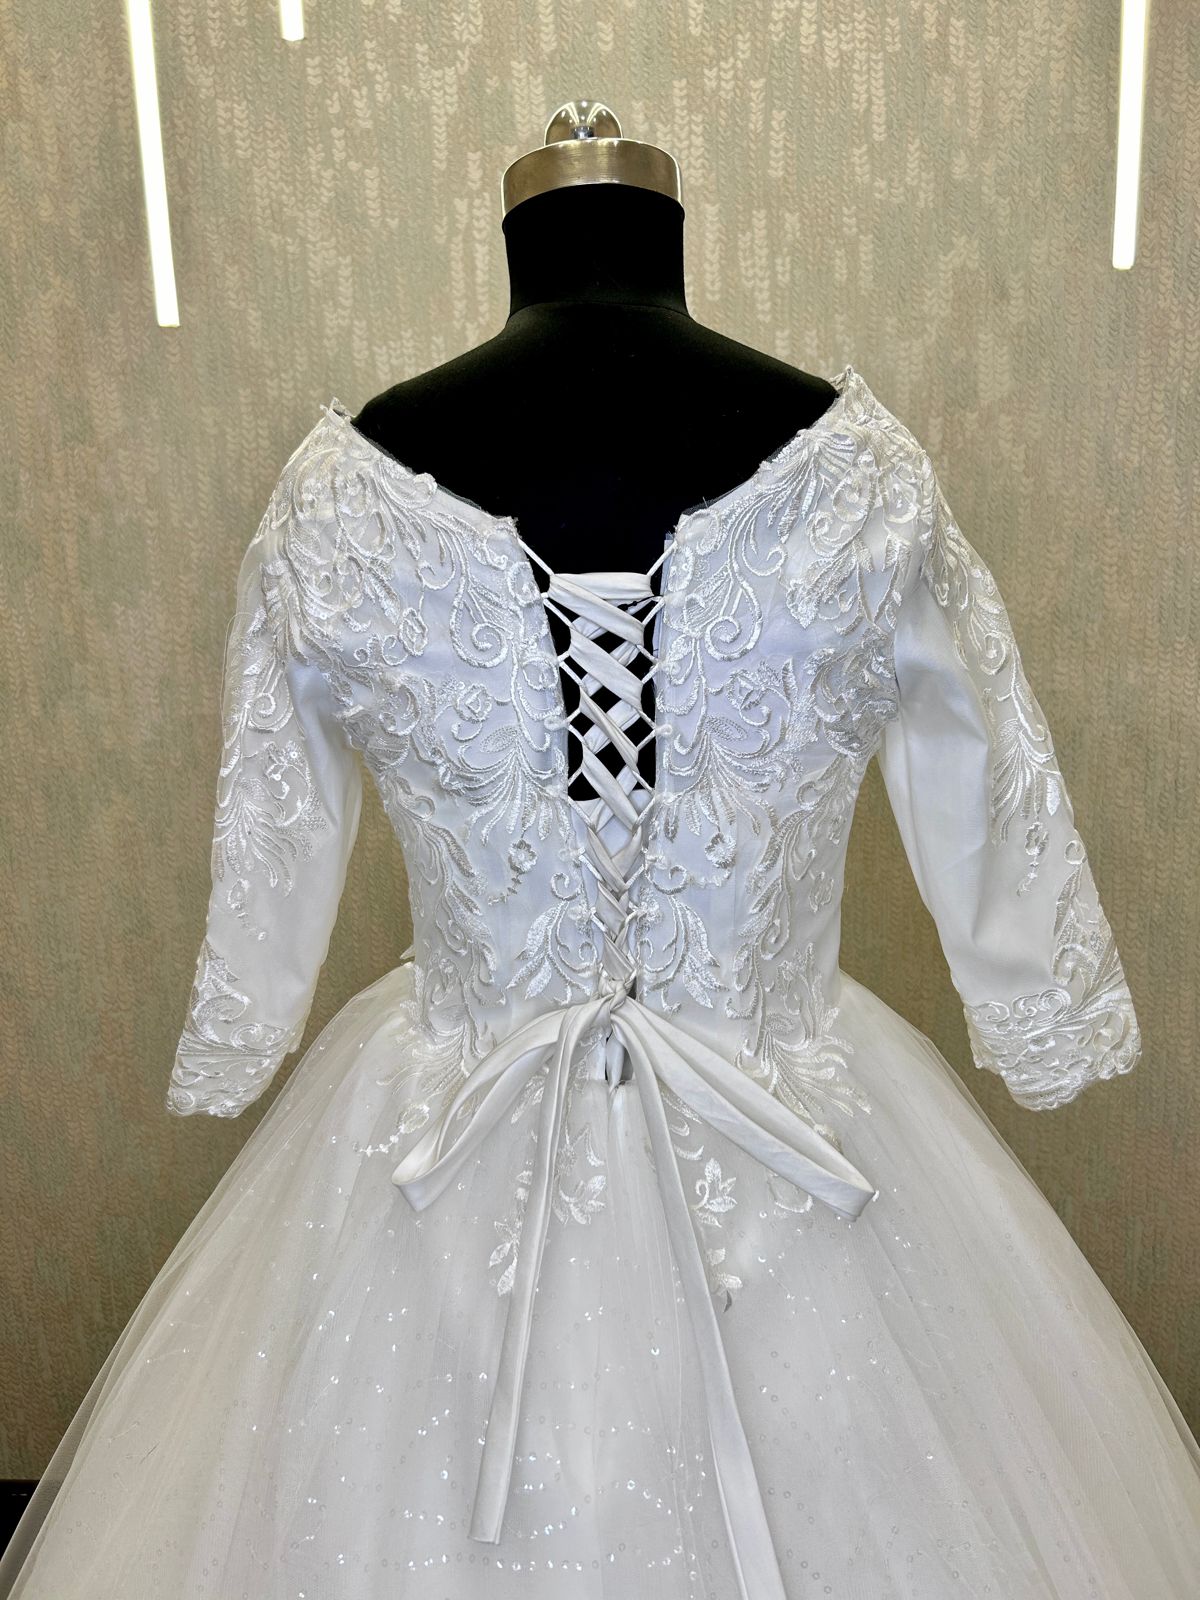 GownLink's Traditional White Wedding Ball Gown for the Christian Bride Who Wants to Honor Her Faith GLGF051B With Covered Transparent  Area